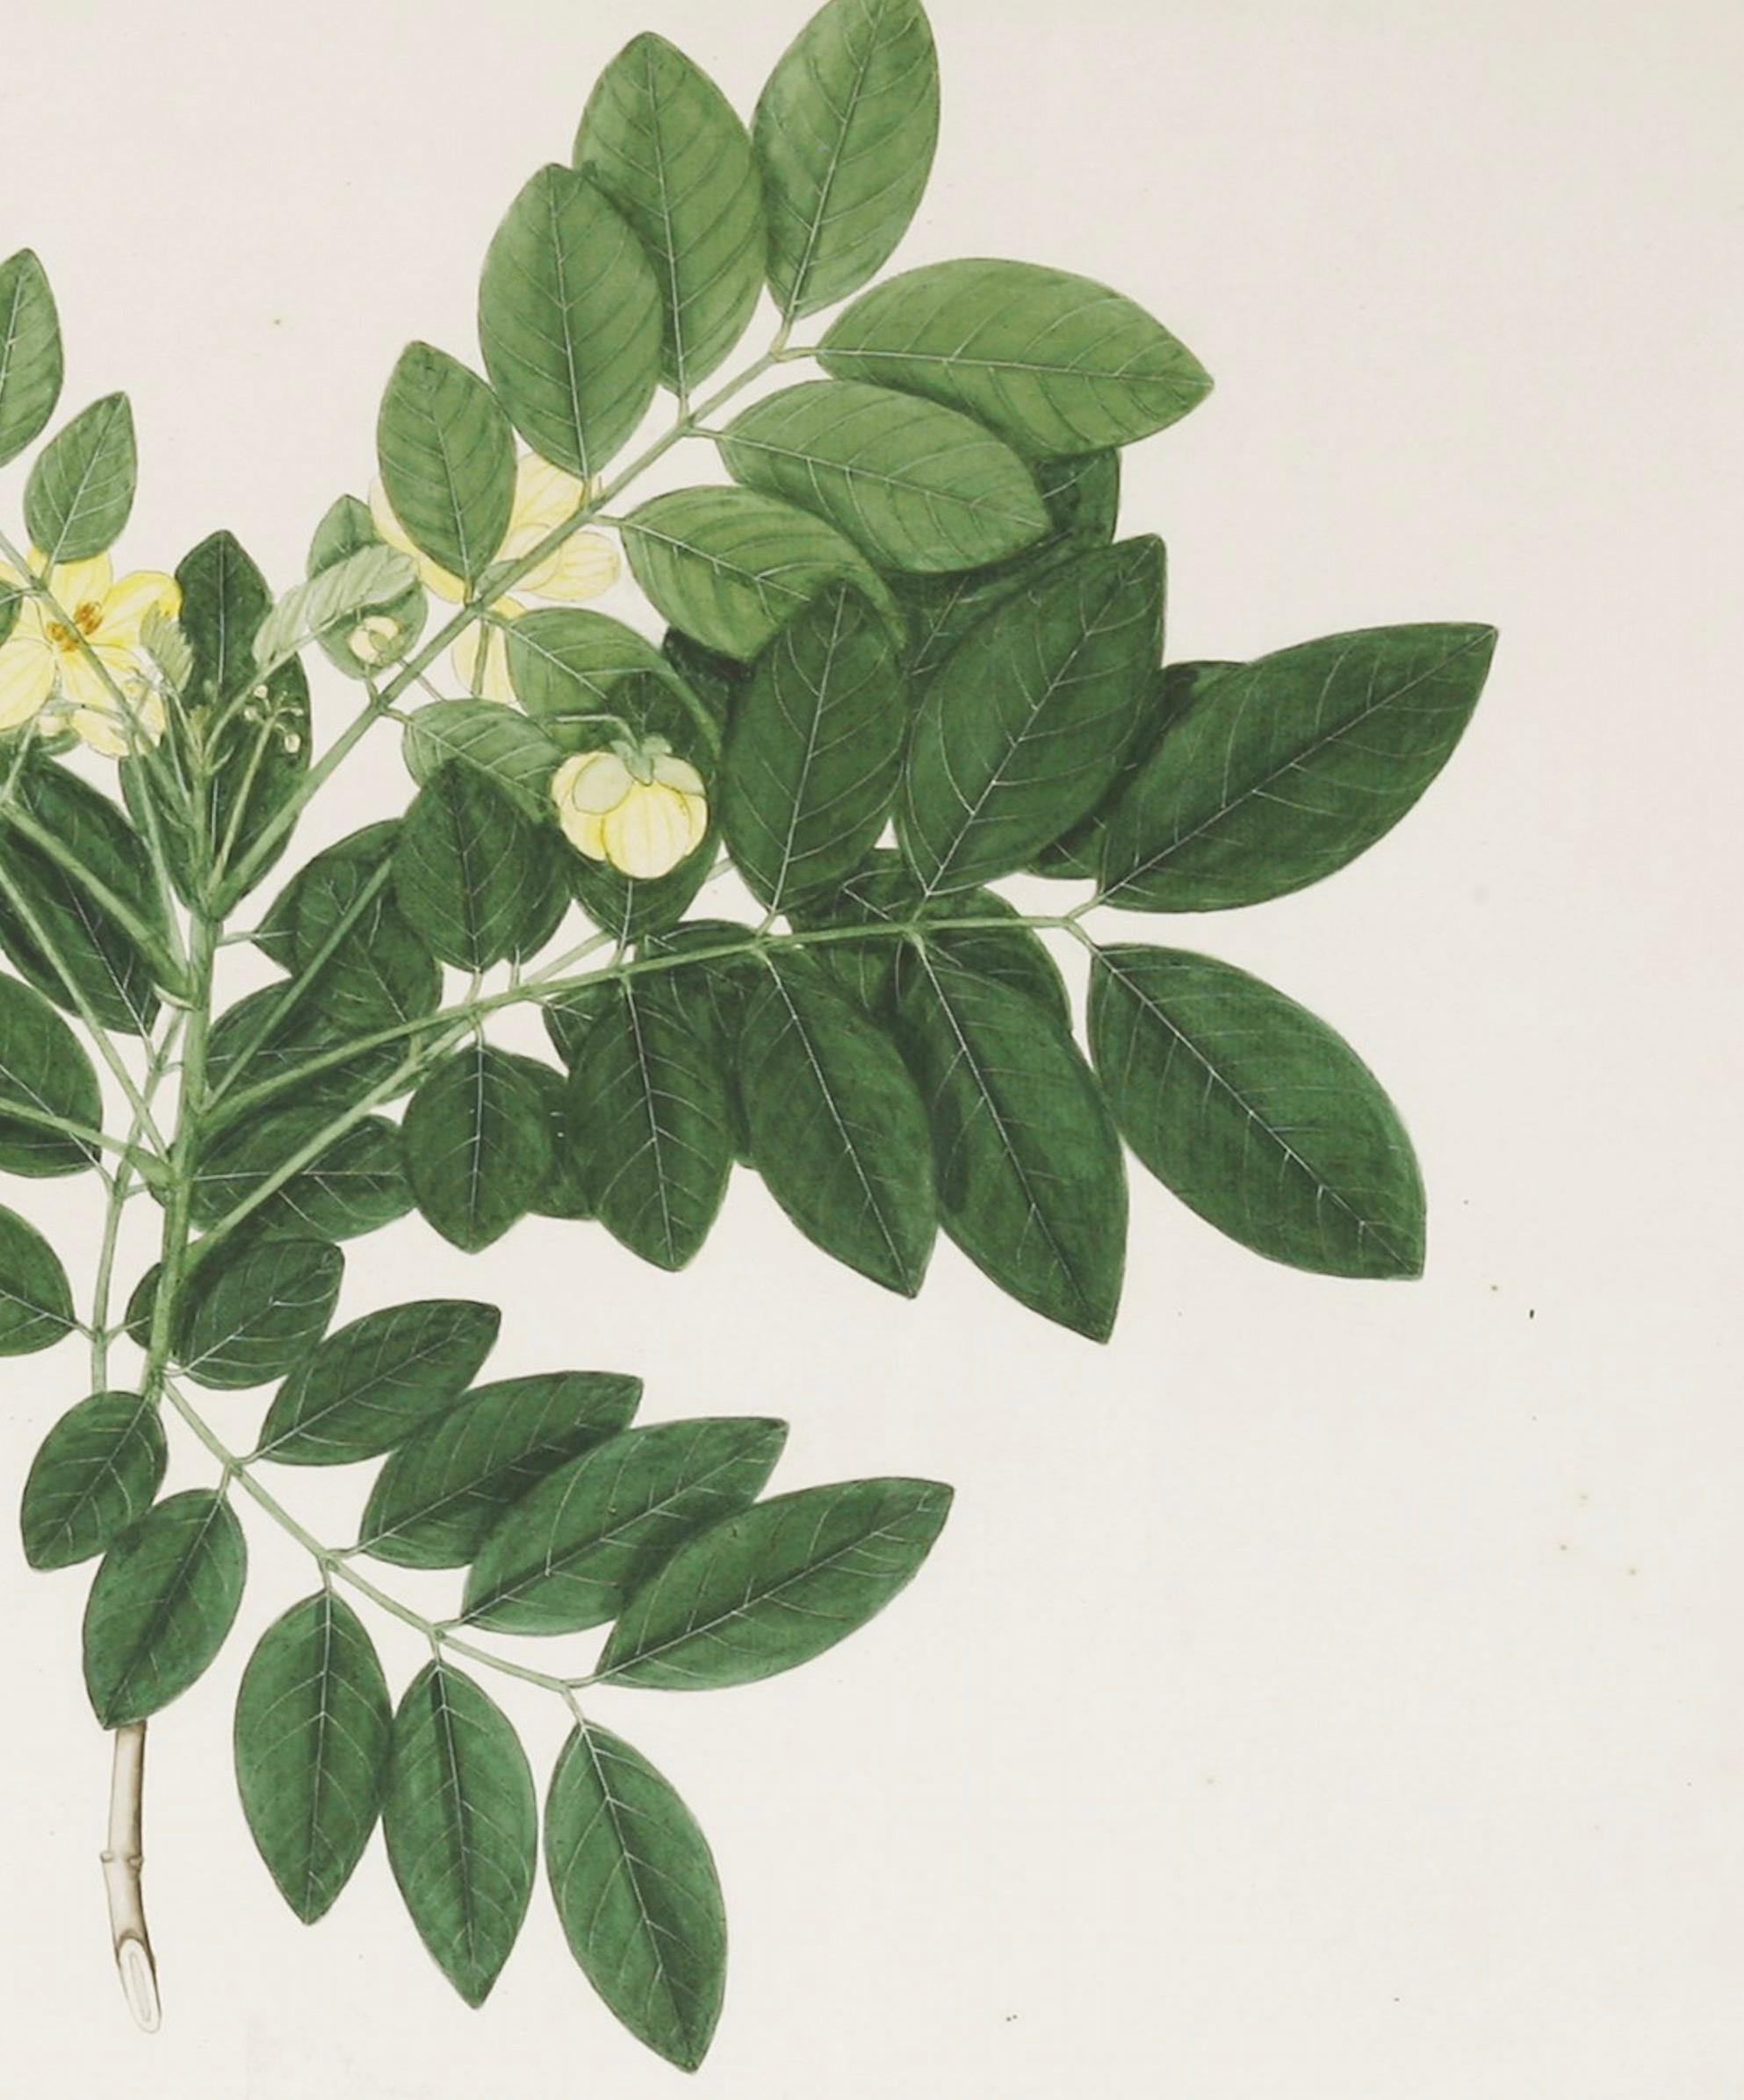 A fine late 18th century, early 19th century watercolour of an Indian shrub with yellow flowers.

By Janet Dick. A paper label on the reverse is inscribed ‘Drawn while the artist was resident in India between 1792 and 1807'.

Mounted and